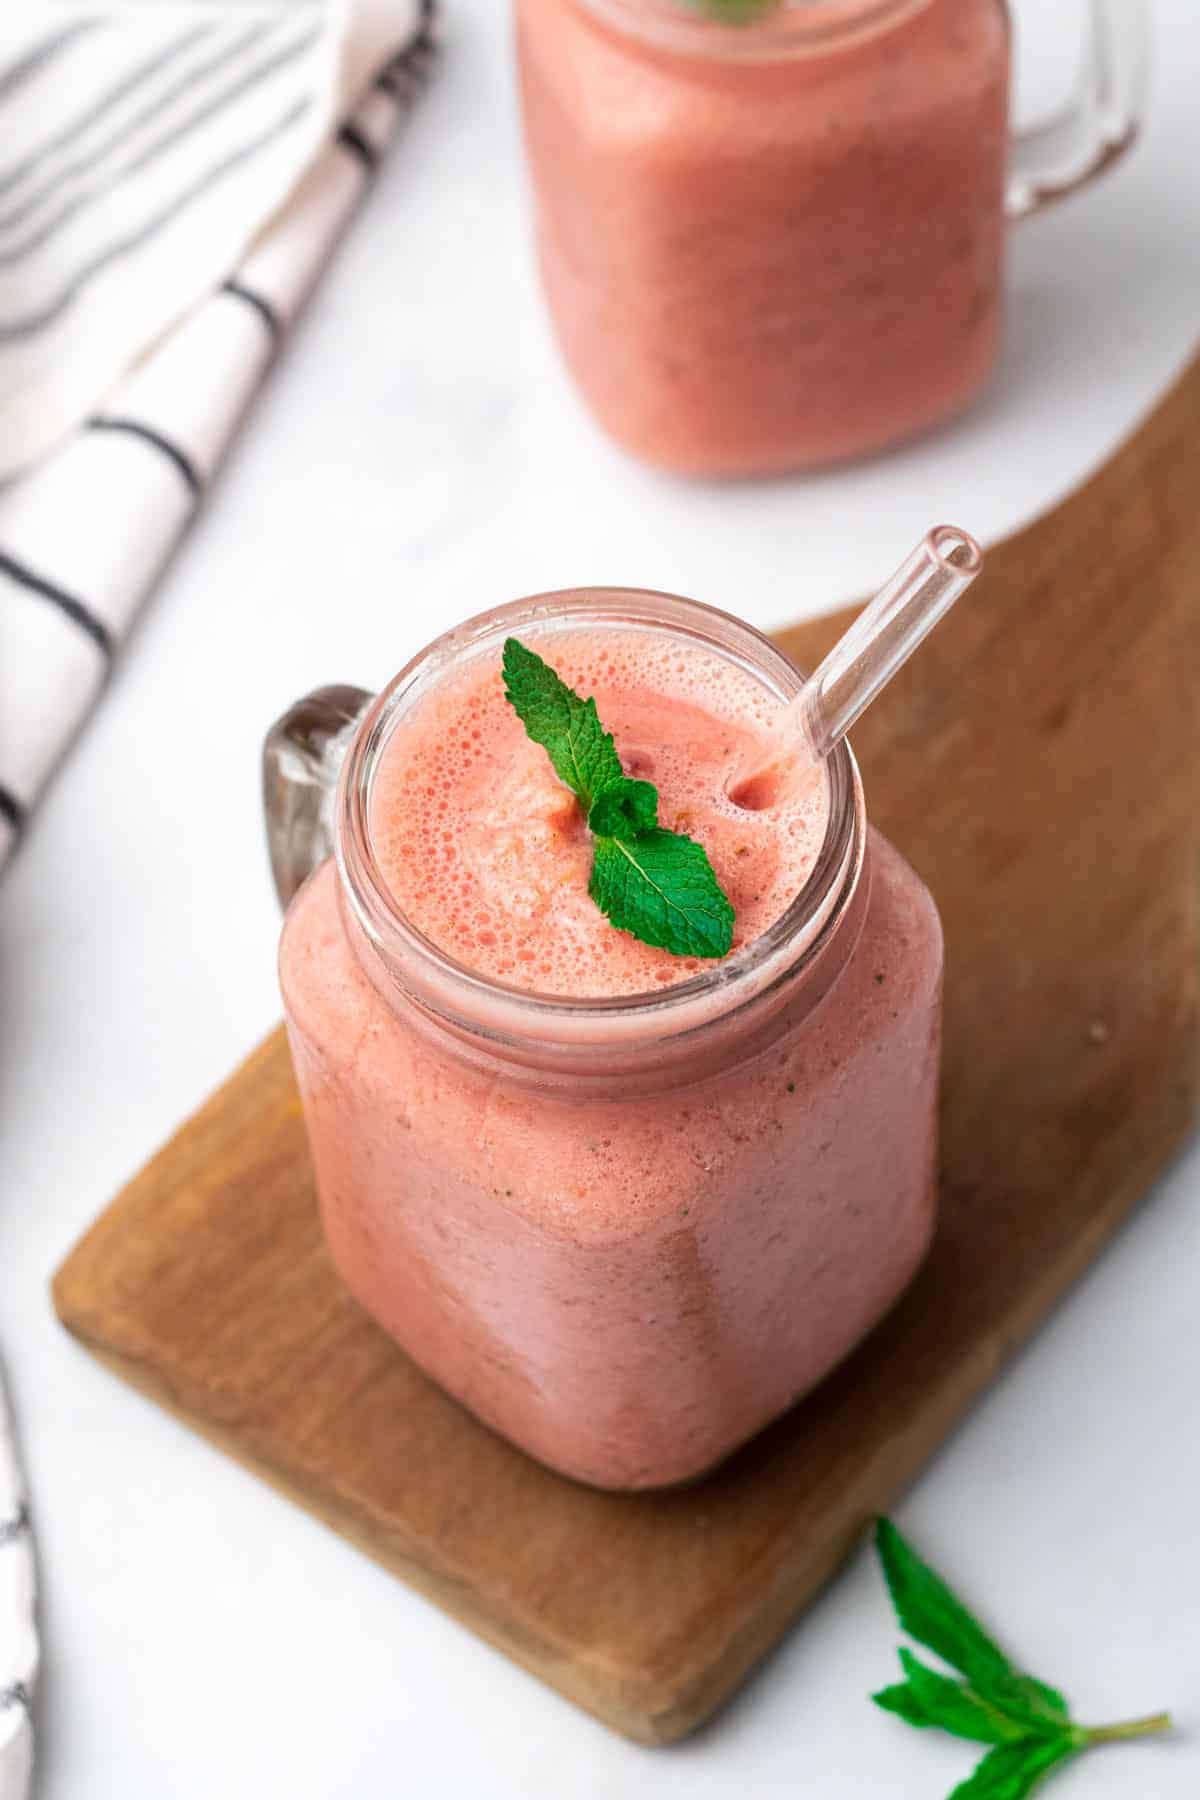 Smoothie in a glass jar with a straw, garnished with fresh mint